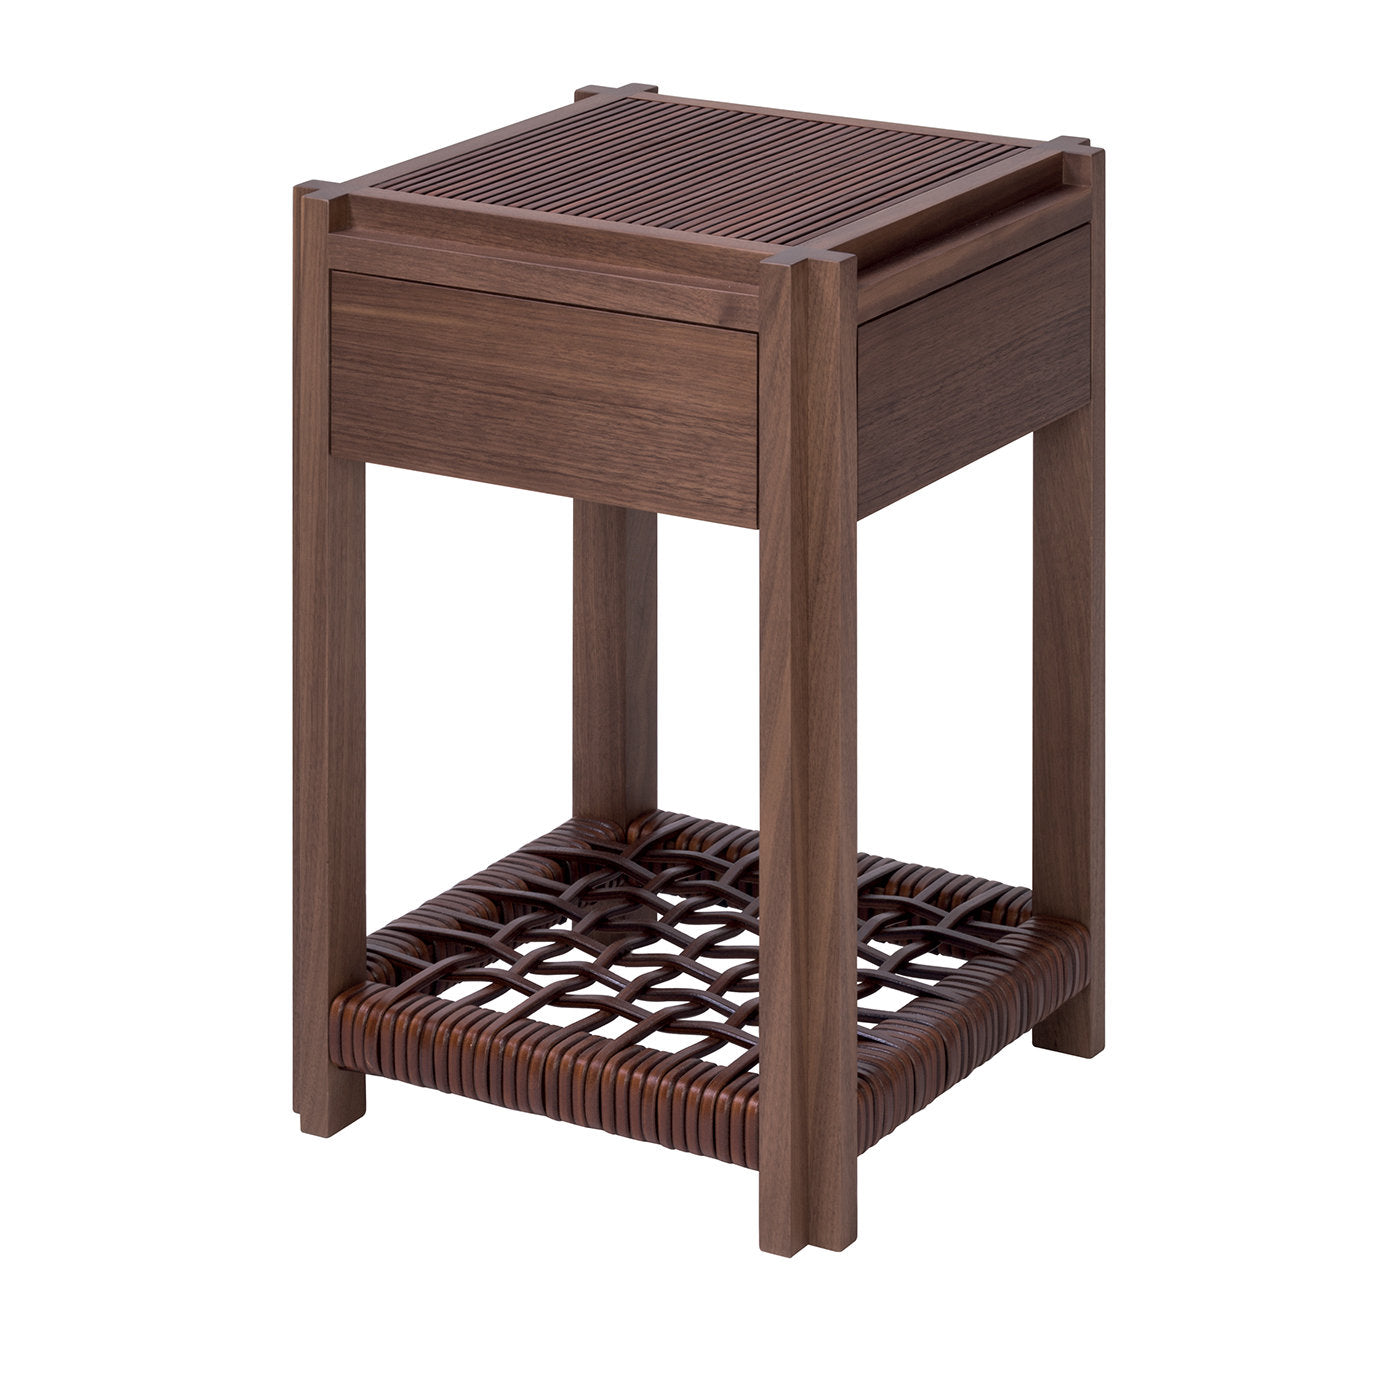 Structura Crisscross Small Square Side Table - Main view